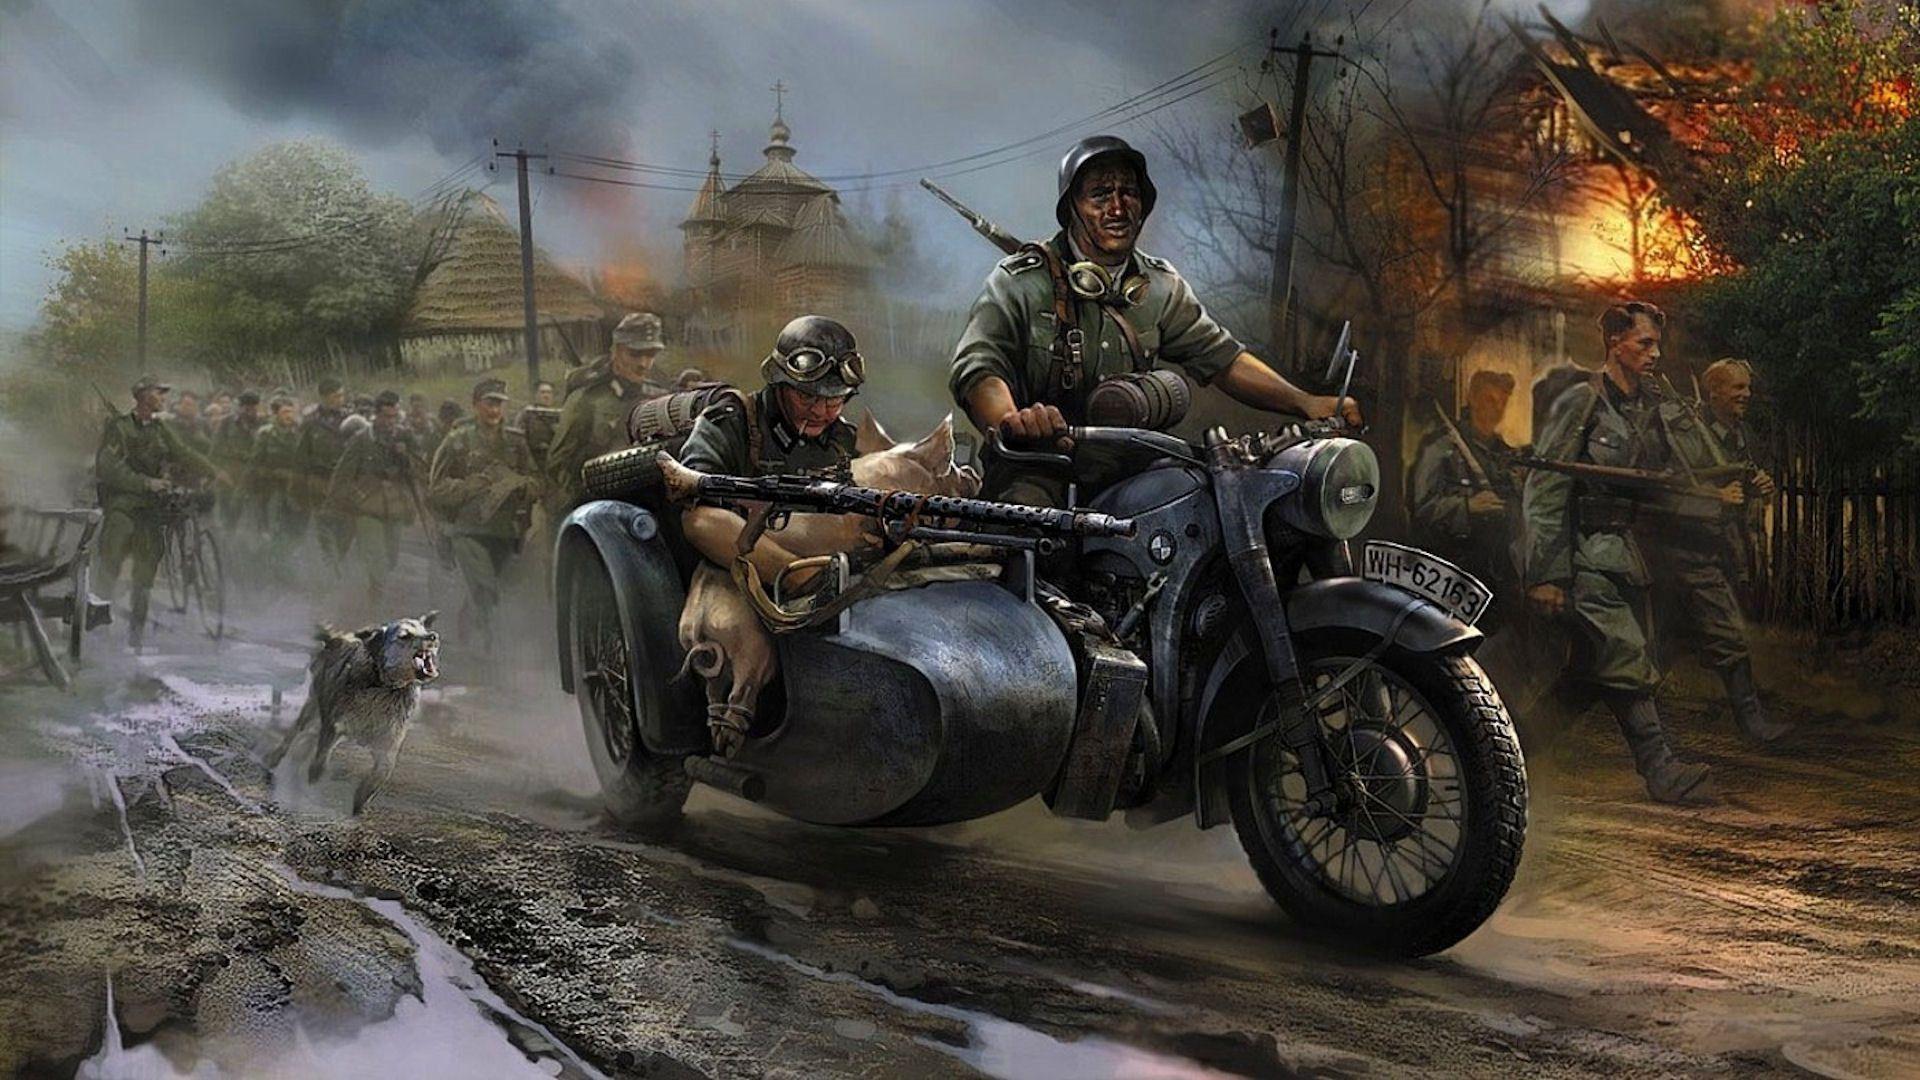 Army Motorcycles Wallpapers - Wallpaper Cave